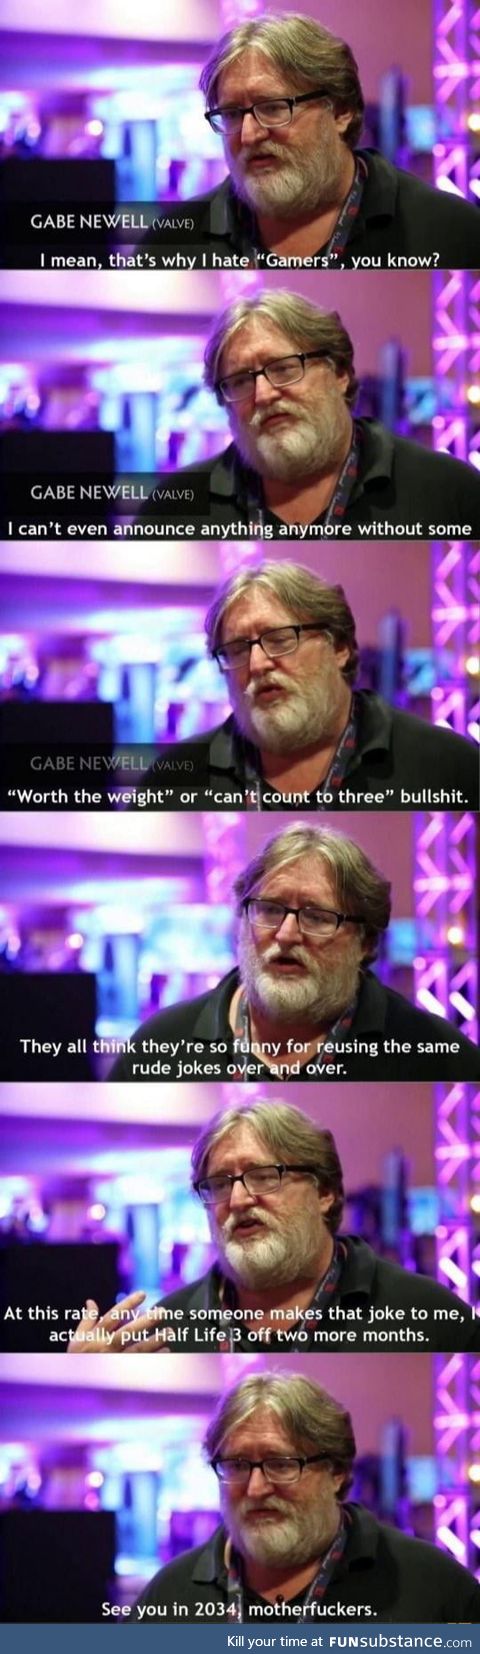 E gaben, can you count to tree?